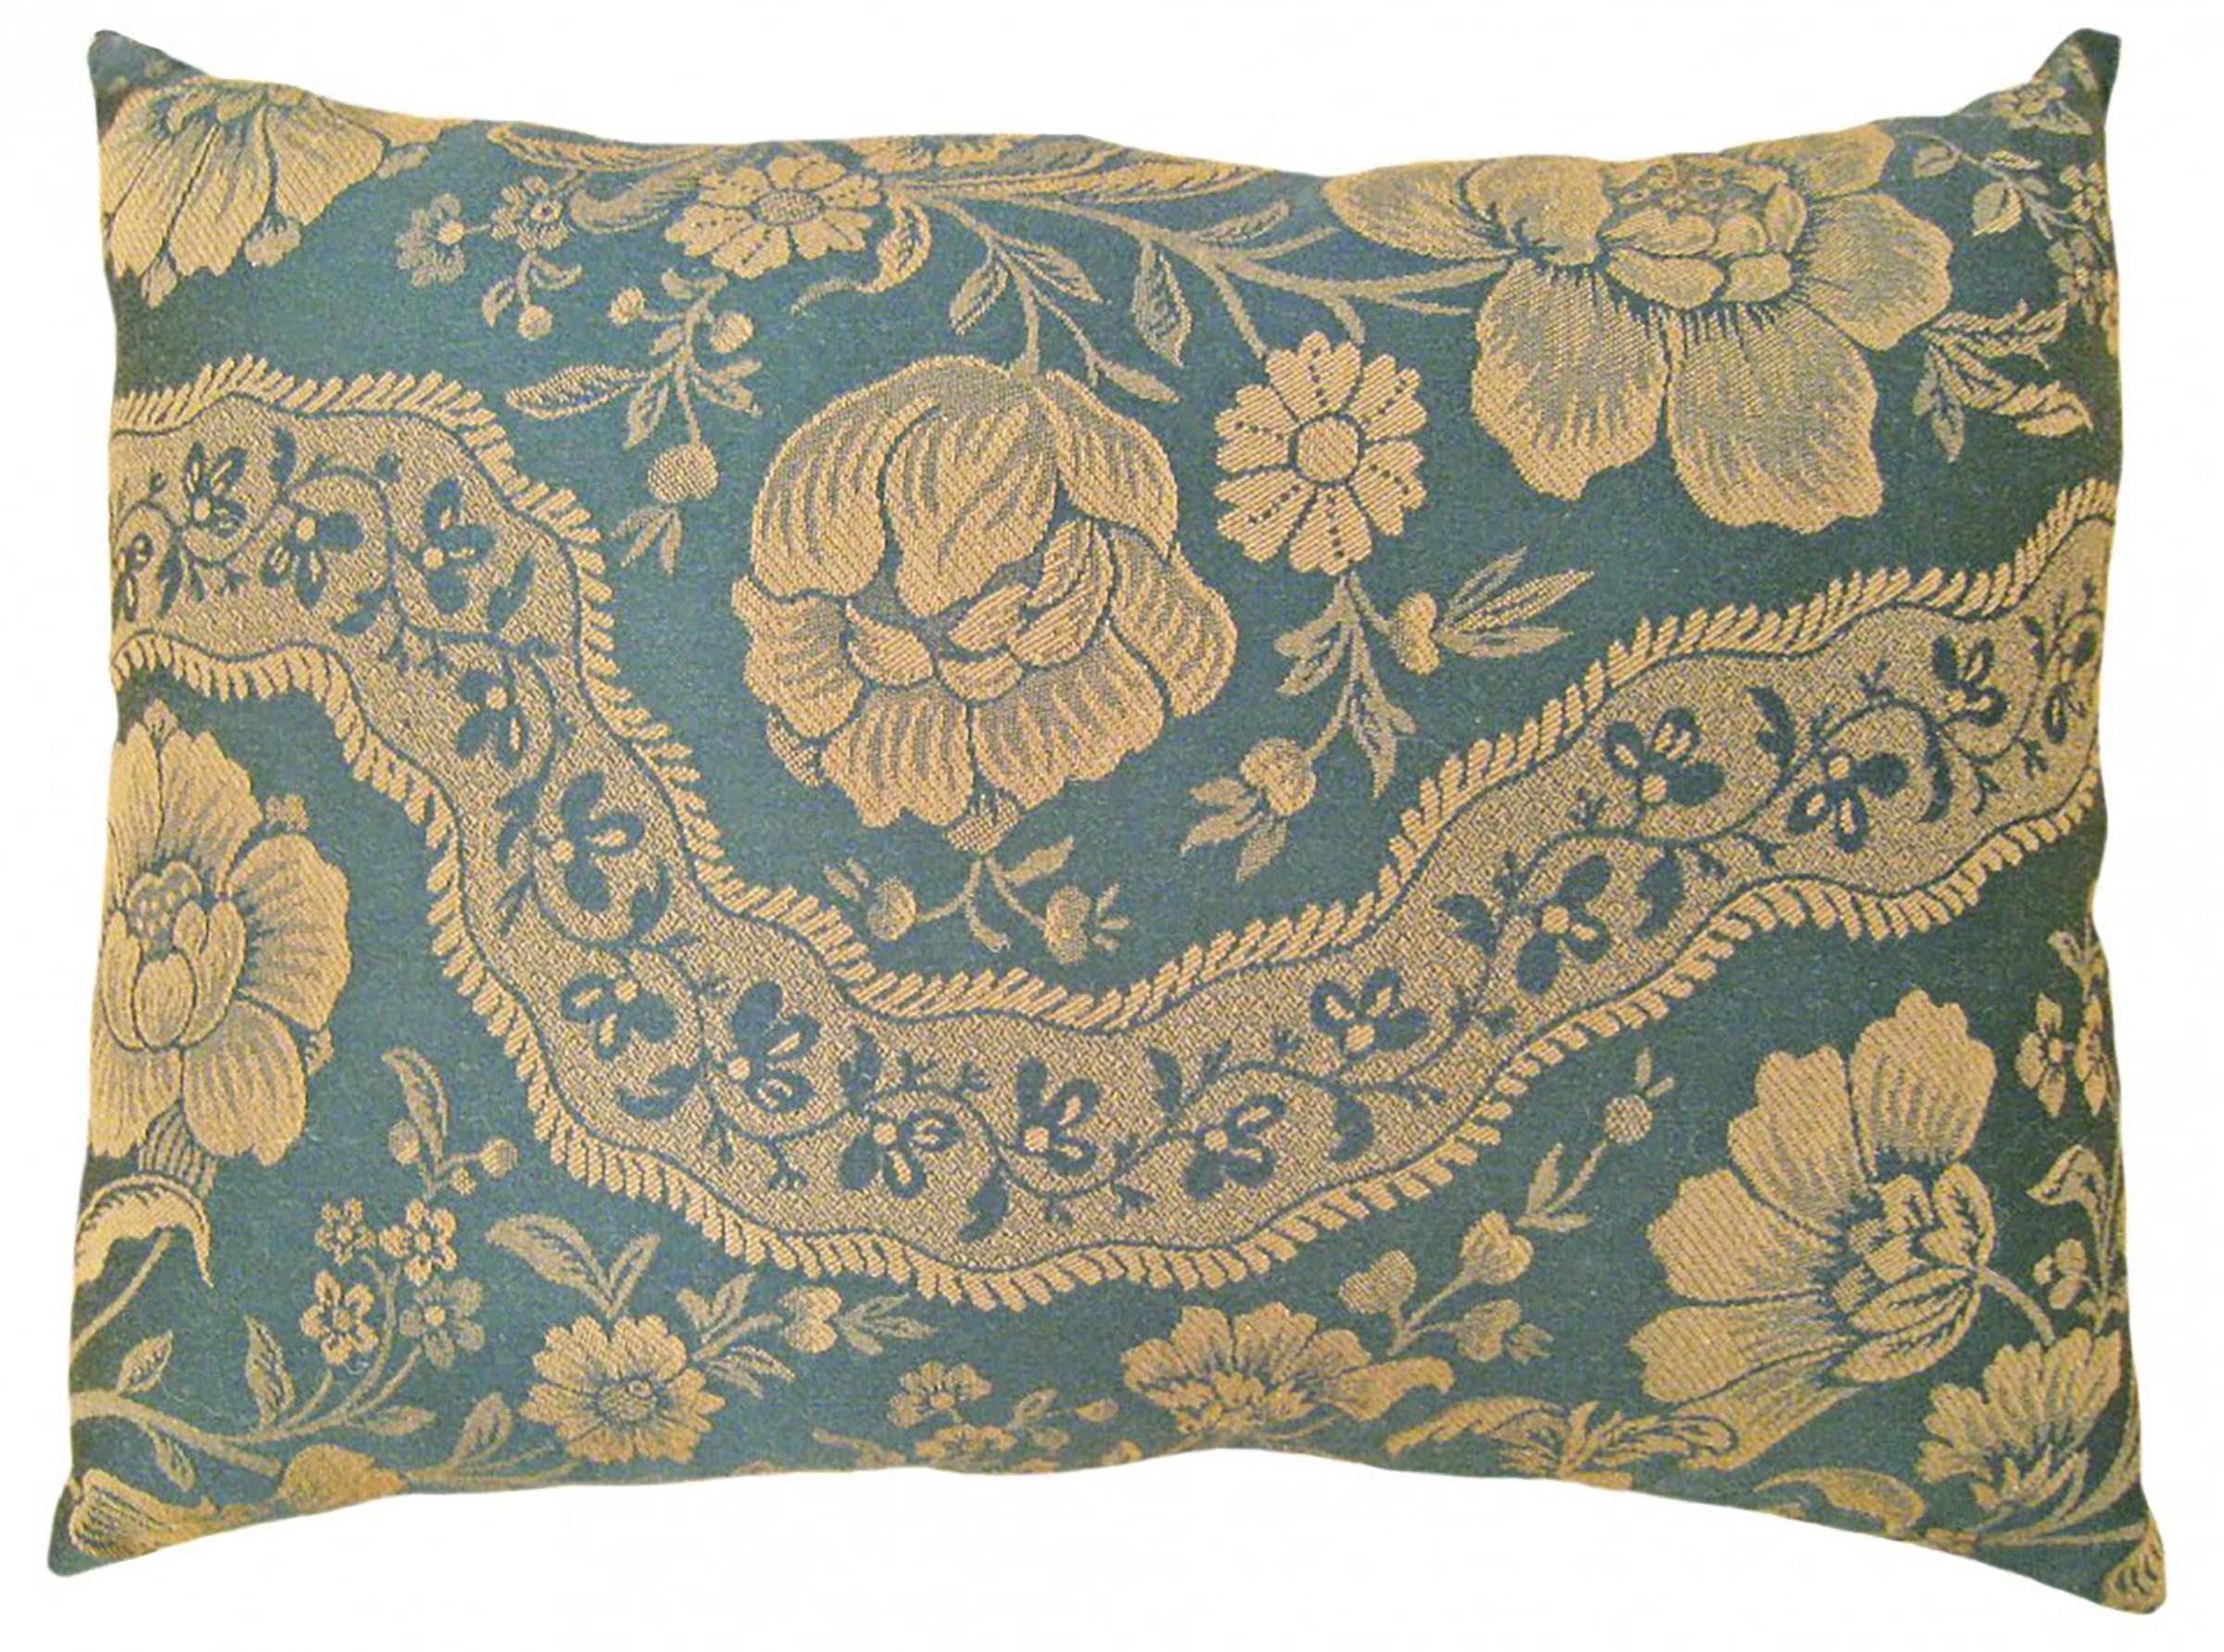 Set of Decorative Vintage European Chinoiserie Fabric Pillows with Floral For Sale 1